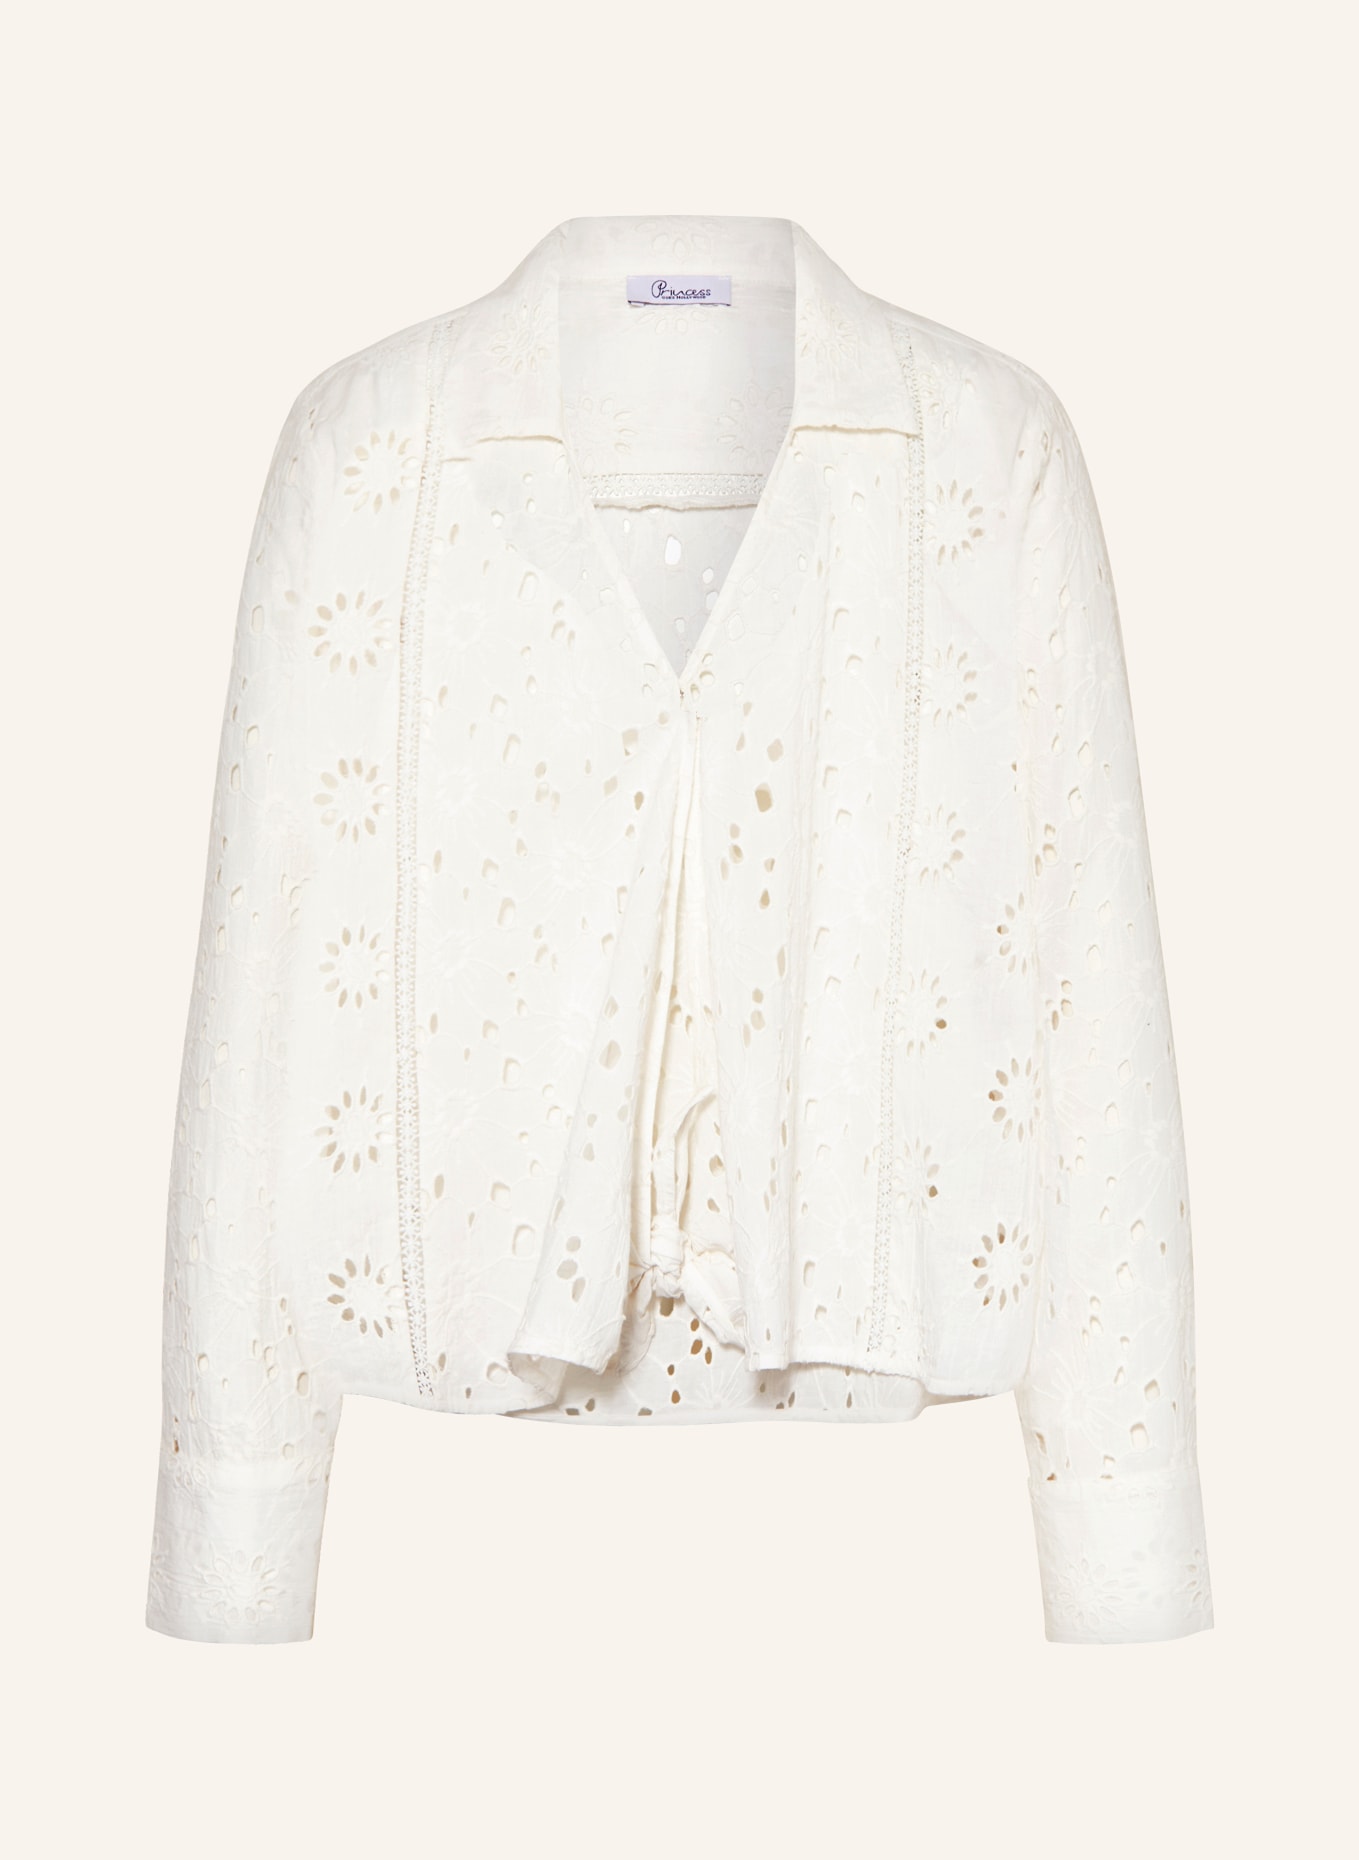 Princess GOES HOLLYWOOD Shirt blouse made of broderie anglaise, Color: WHITE (Image 1)